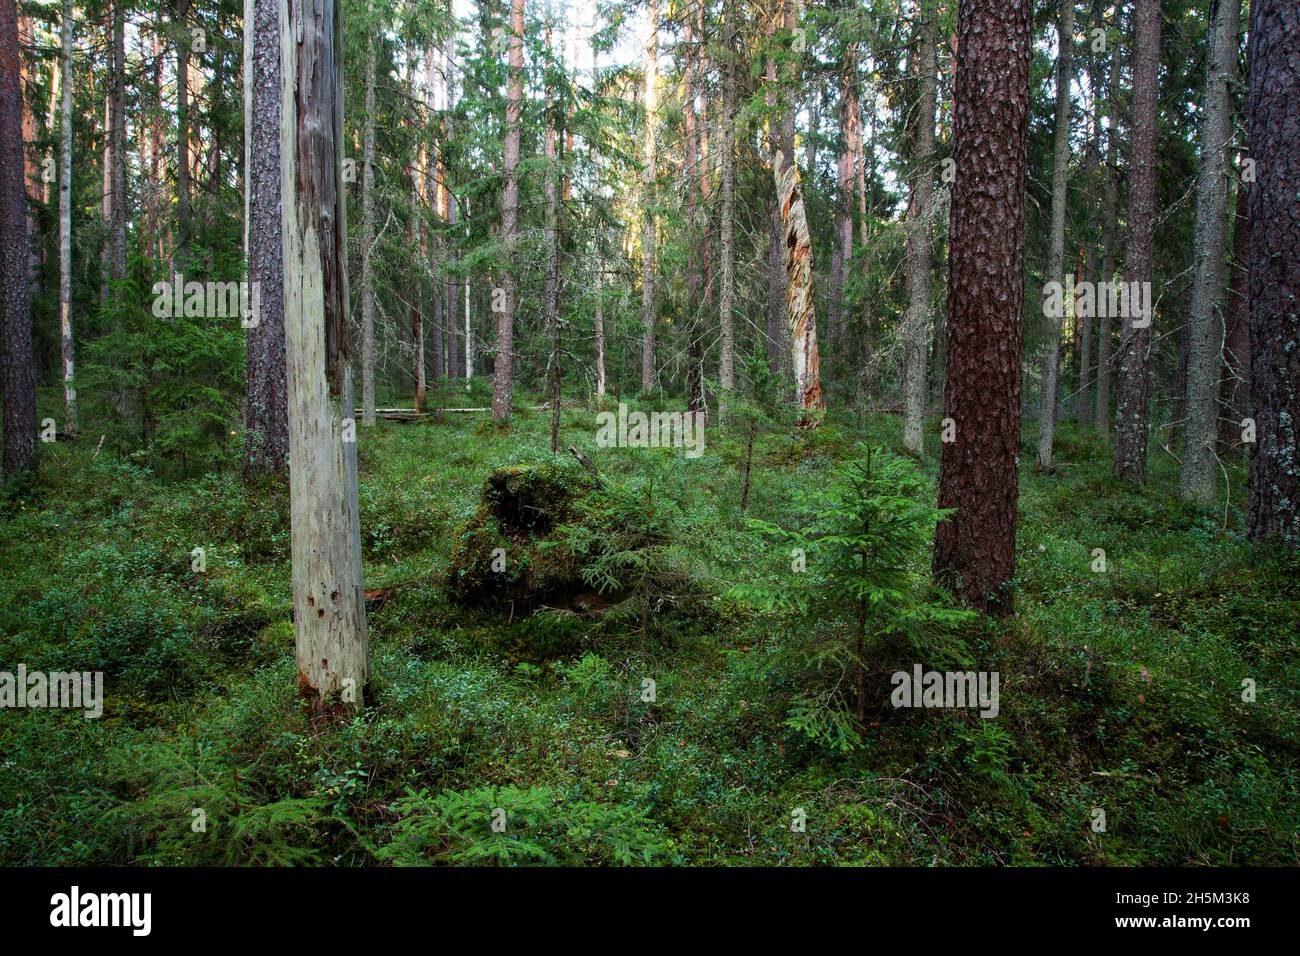 An Estonian old-growth forest with decaying and old trees during a summer evening. Stock Photo